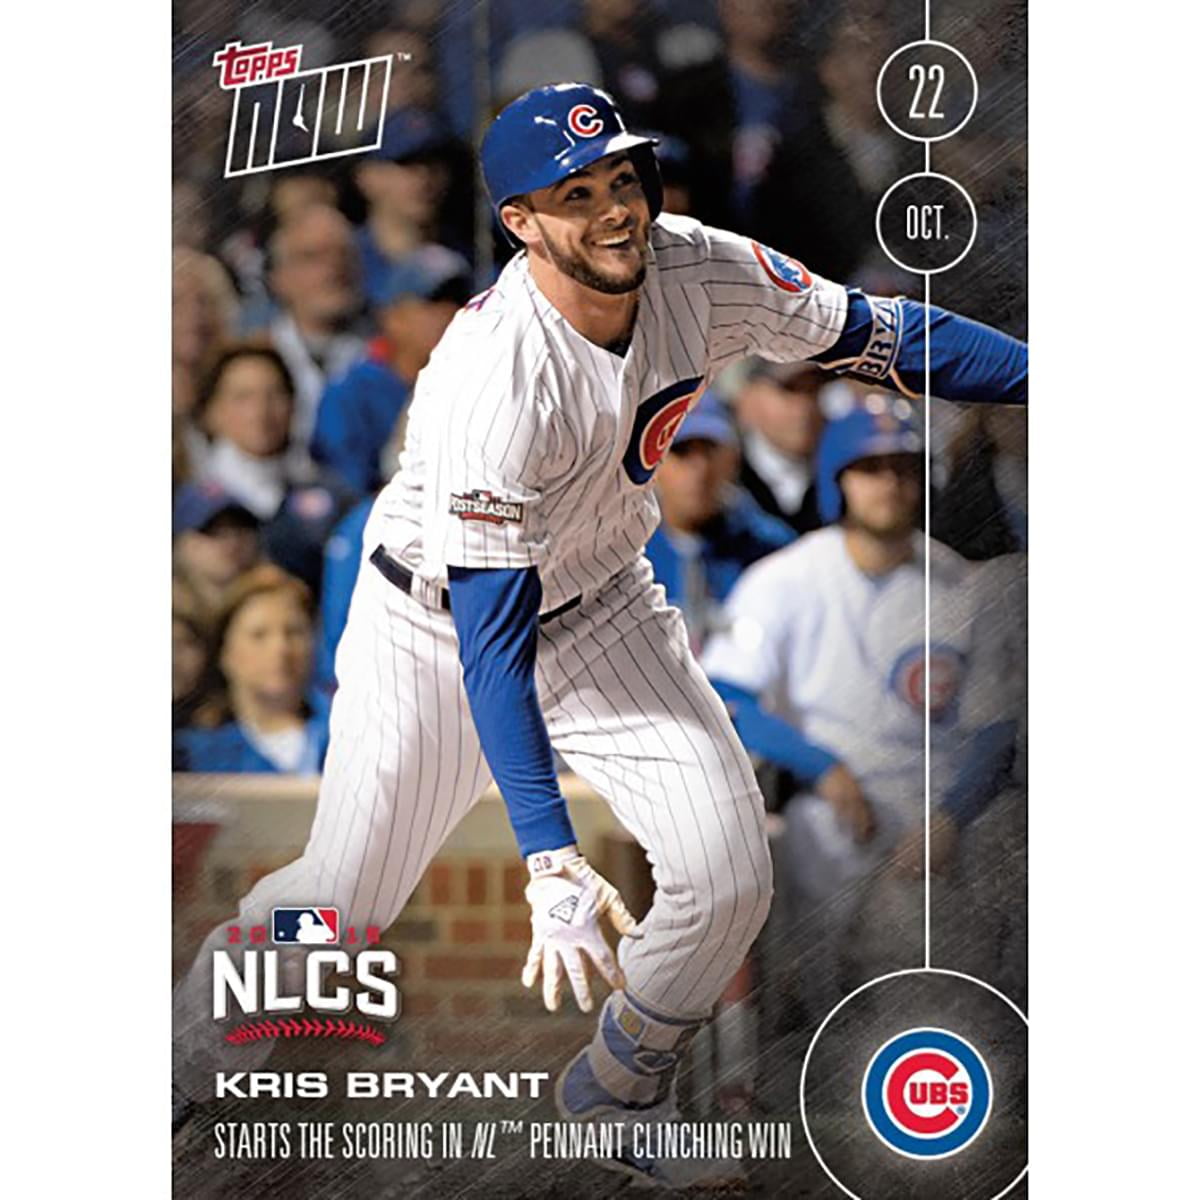 2018 Topps Now Card #69 Chicago Cubs Javier Baez 